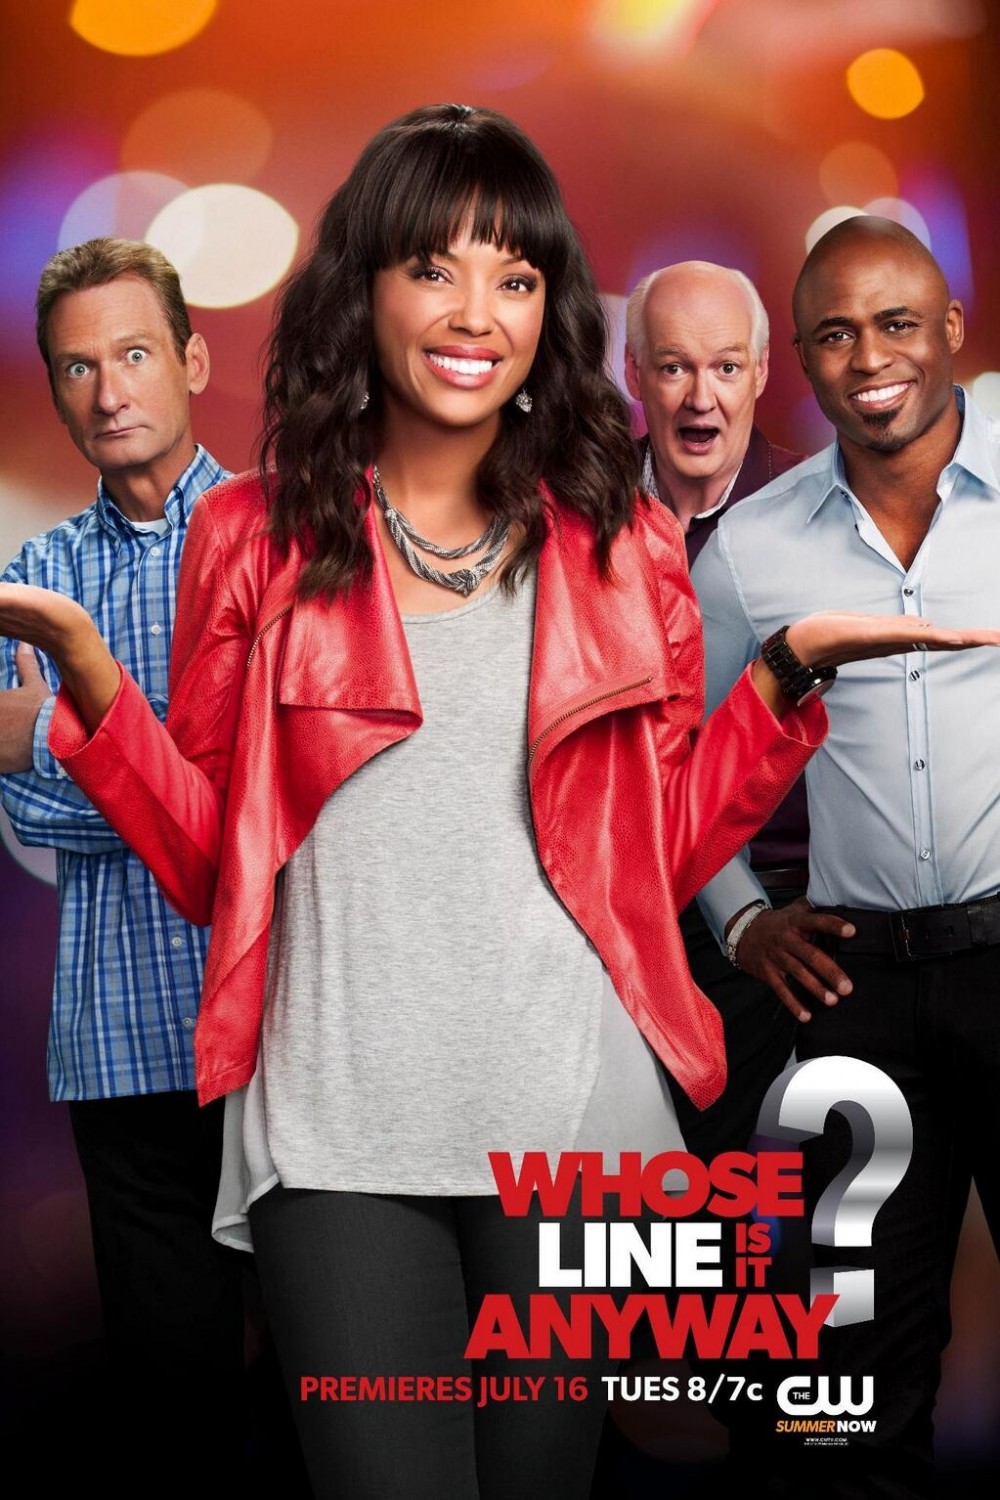 Extra Large TV Poster Image for Whose Line Is It Anyway (#1 of 4)